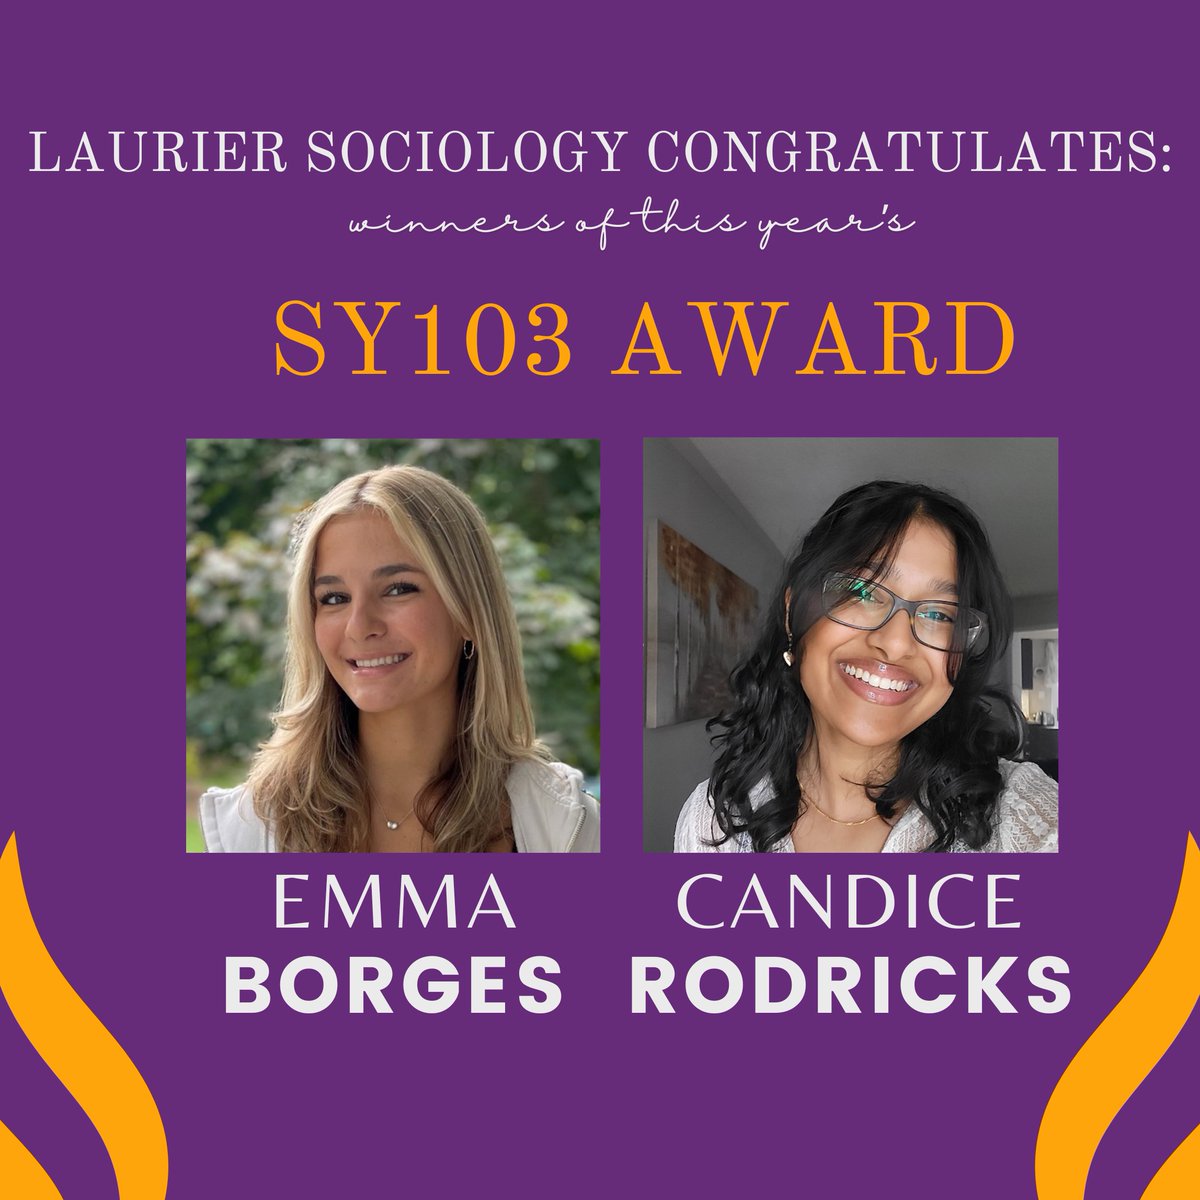 We're celebrating two winners of the SY103 award this year! Congratulations to Emma Borges & Candice Rodricks! The SY103 Award is given out by the Dept. of Sociology to a Sociology major in their 2nd year, with the highest percentage grade in SY103 taken during their 1st year.